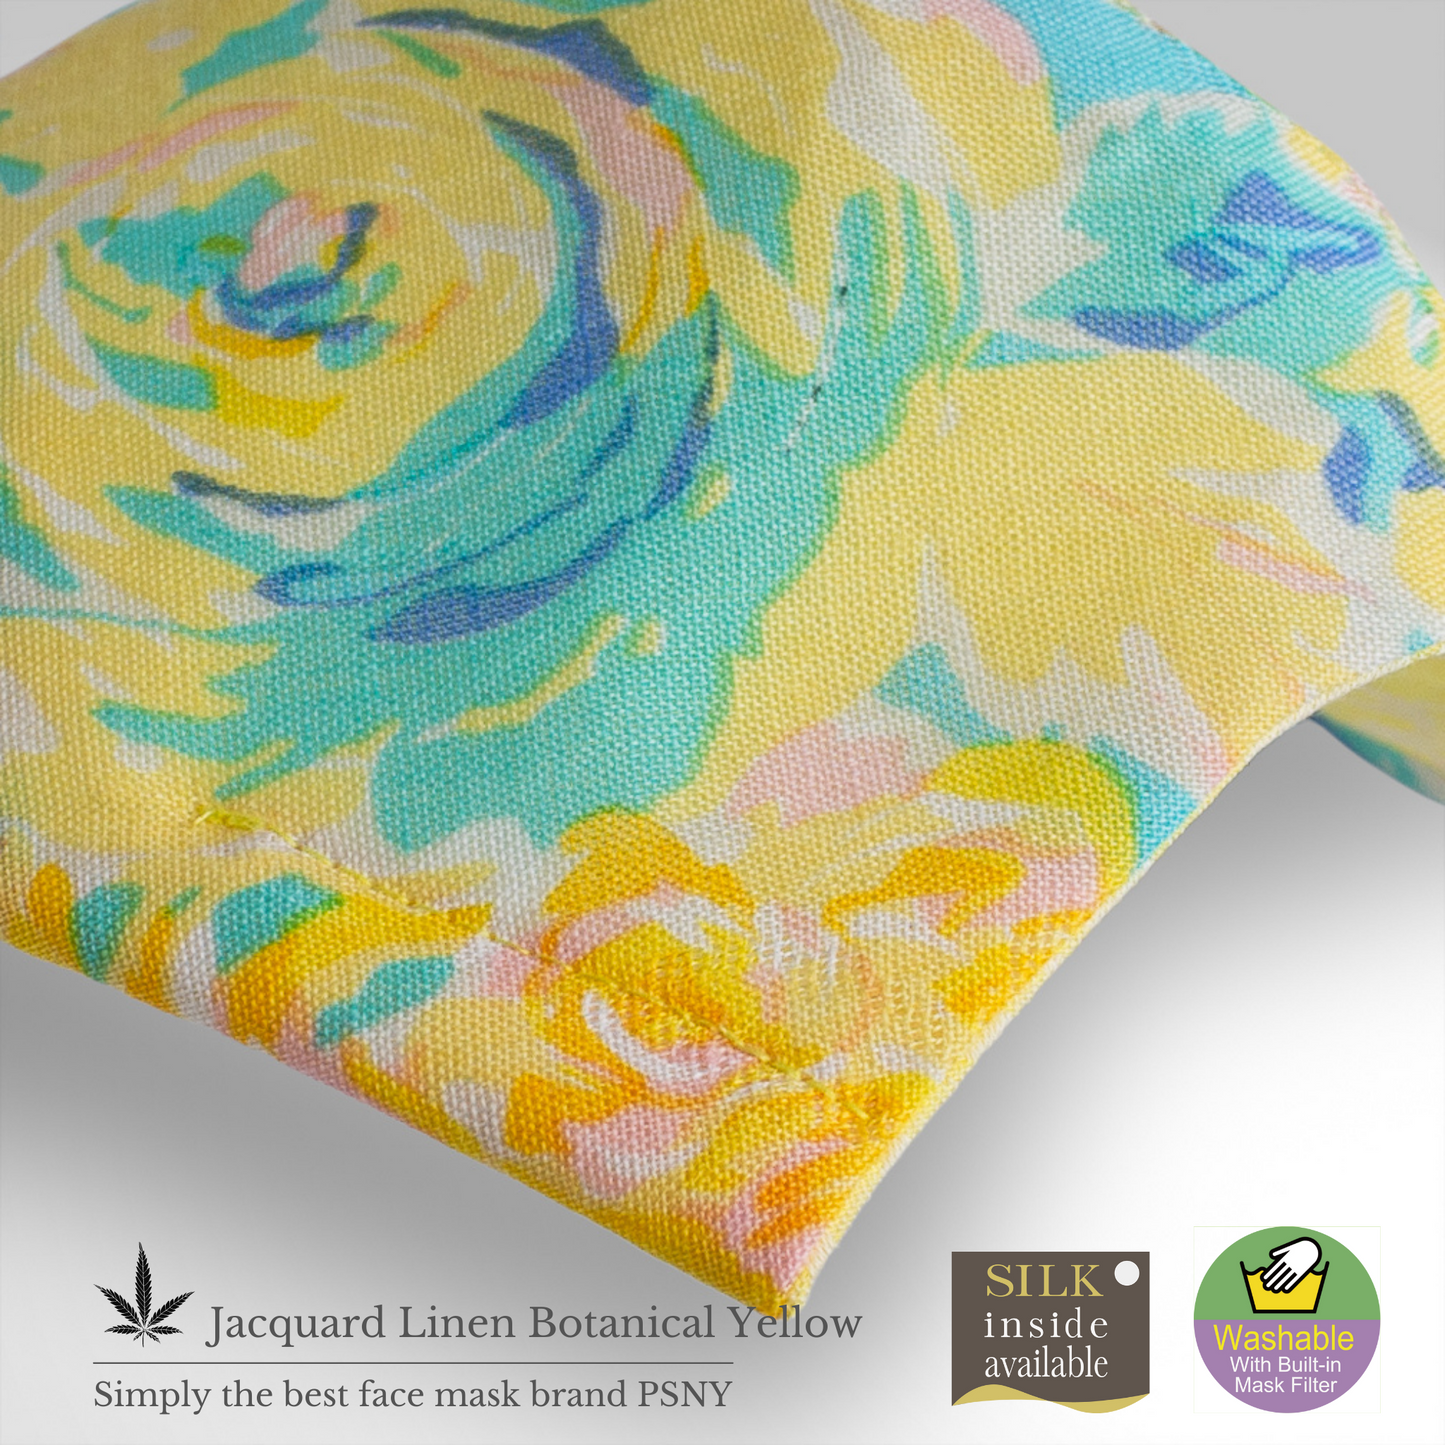 PSNY Jacquard Linen Botanical Yellow 3D Adult Mask with Nonwoven Filter JL11